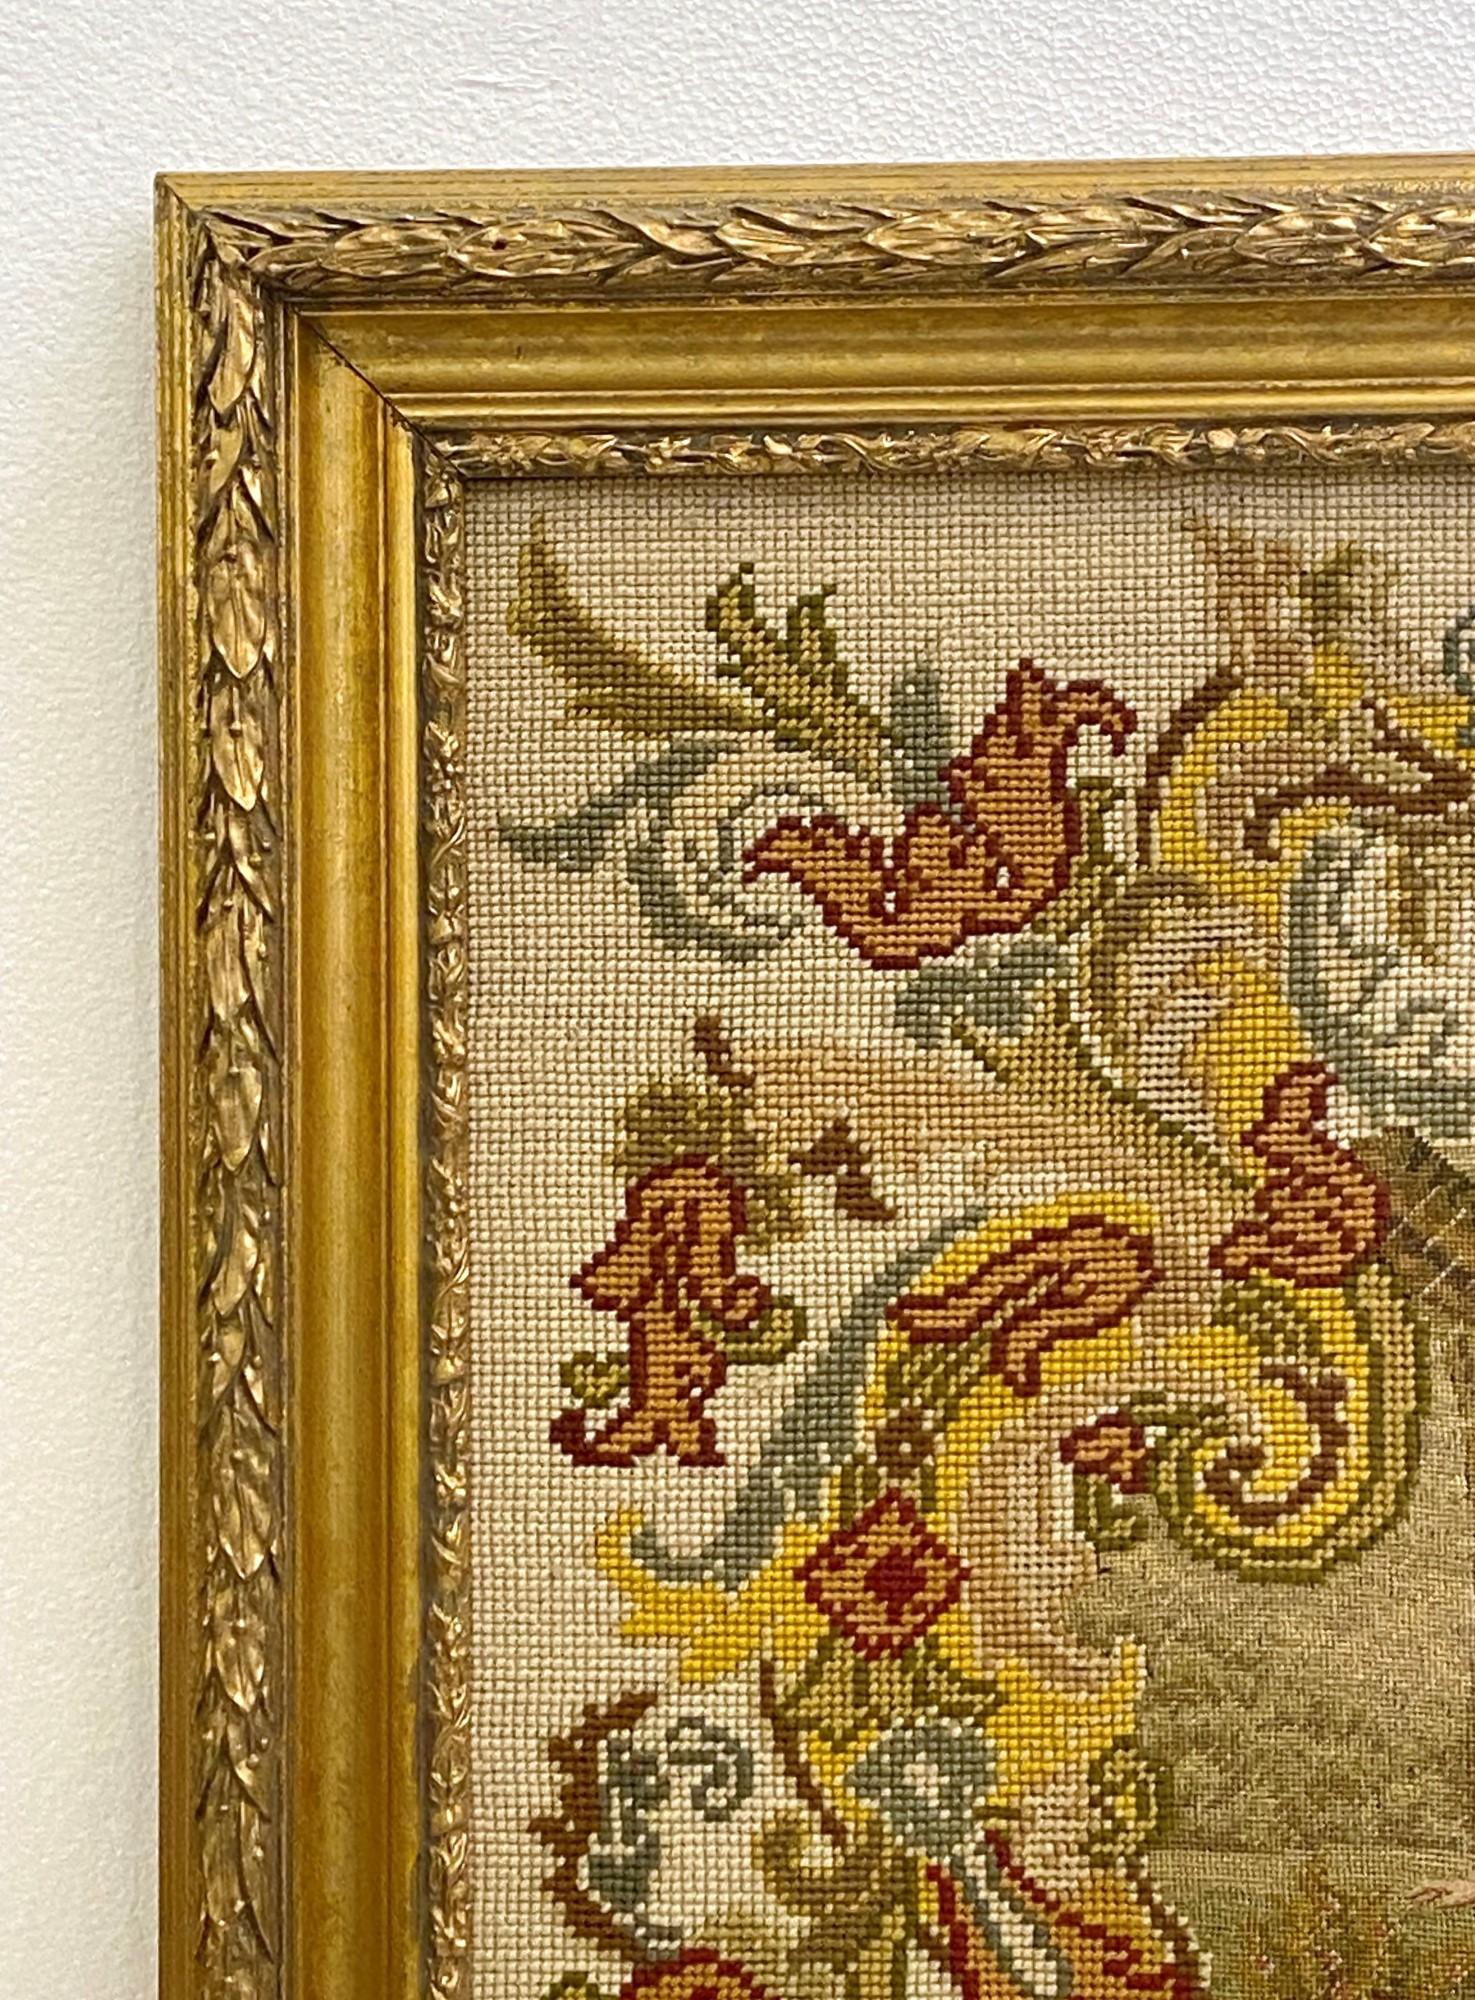 This 1910s Victorian figural scenic needlepoint was reframed in the 1970s in a gold gilded ornate wood frame. This was reclaimed from a Park Ave building in Midtown Manhattan.